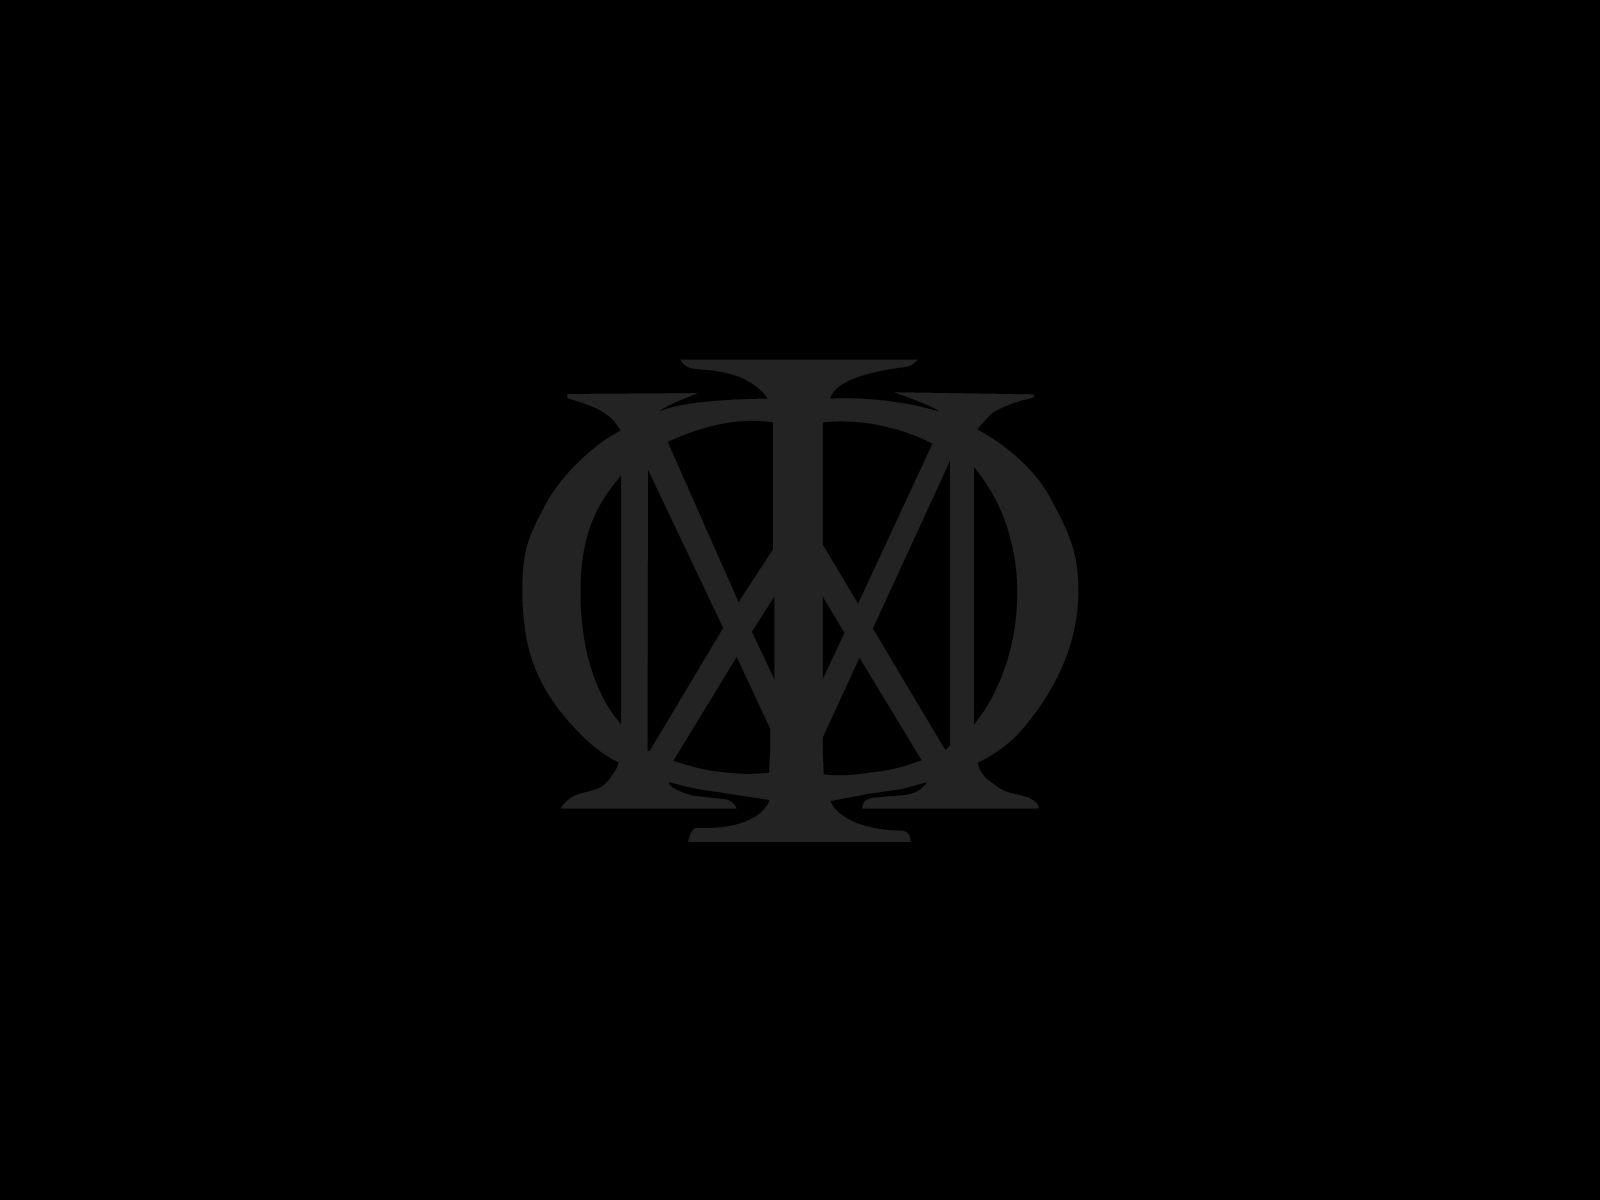 Dream Theater Logo - Opalized Dreams: Dream Theater logo and wallpaper Band logos Rock ...